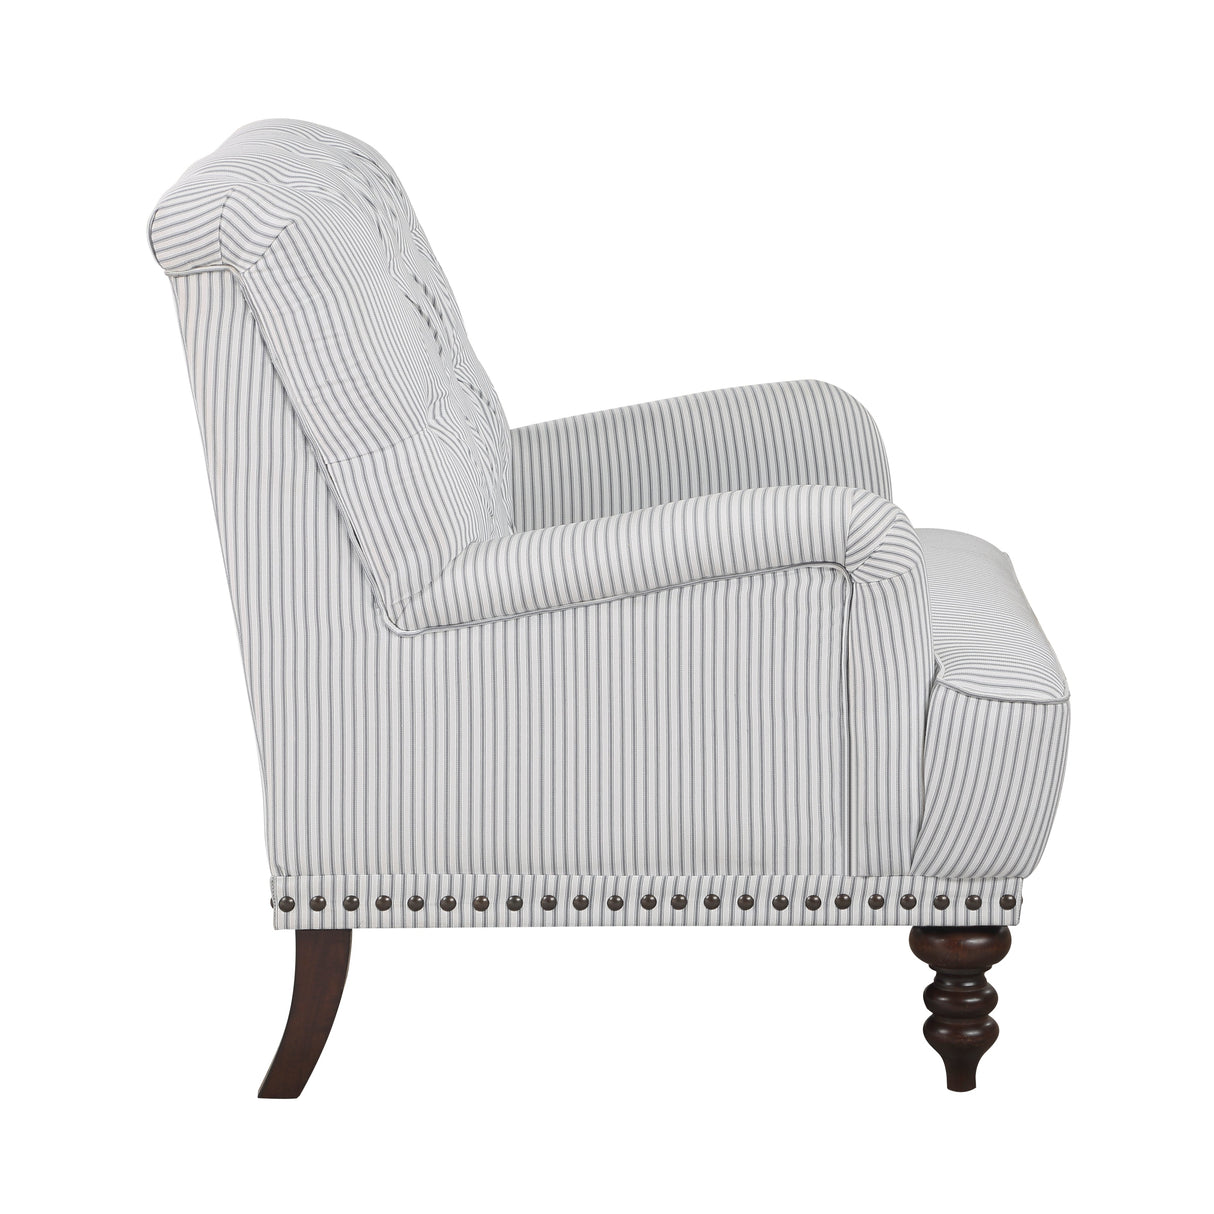 Holland Park Gray/White Accent Chair